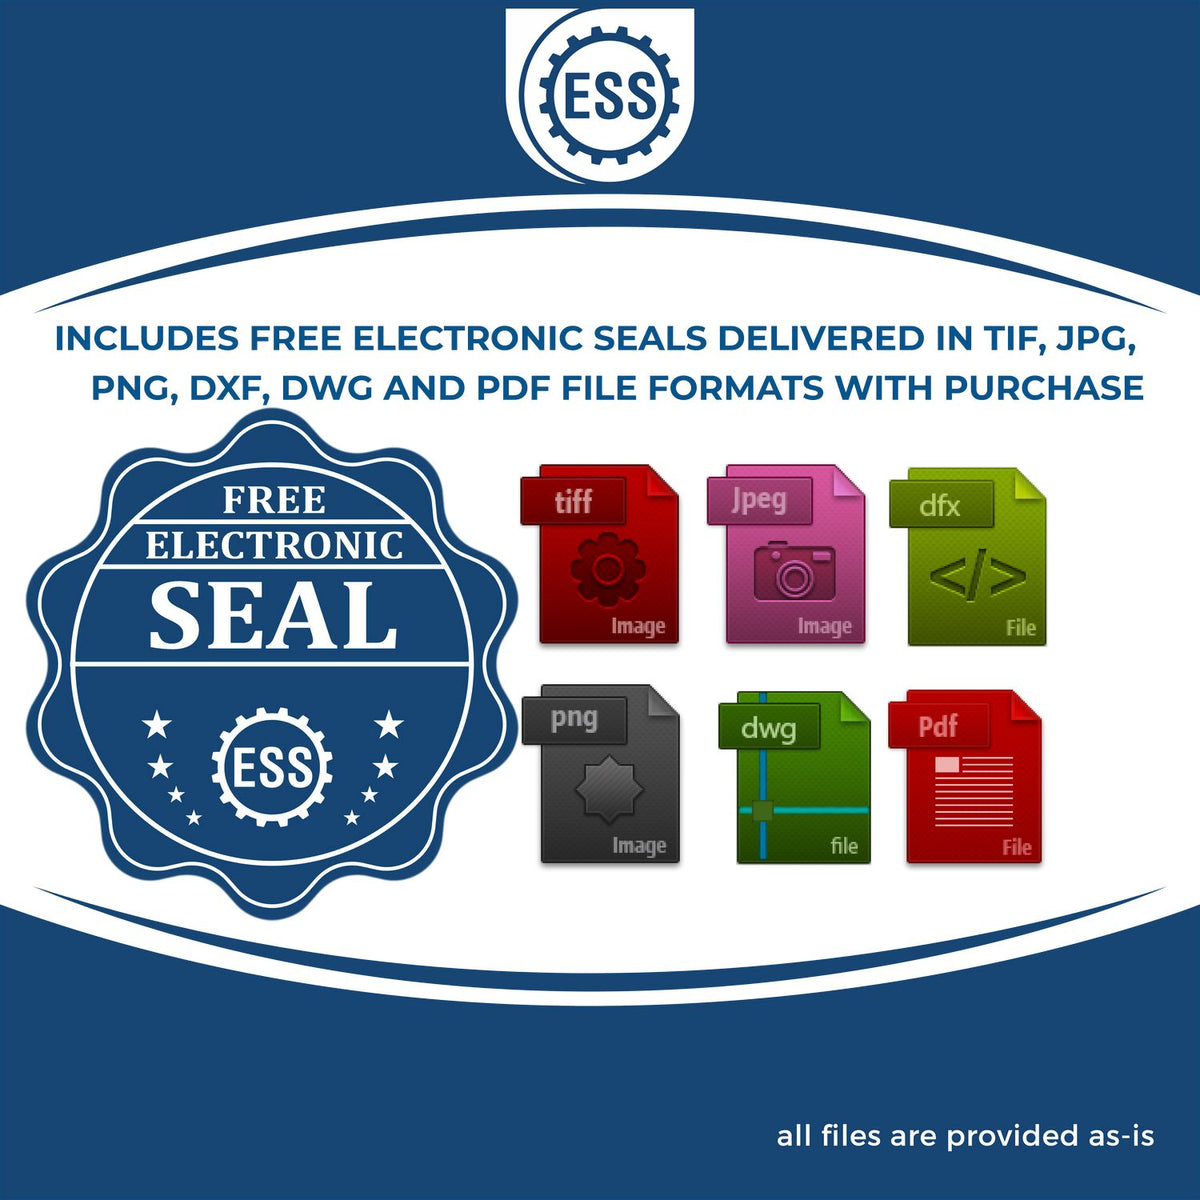 An infographic for the free electronic seal for the Gift Kentucky Geologist Seal illustrating the different file type icons such as DXF, DWG, TIF, JPG and PNG.